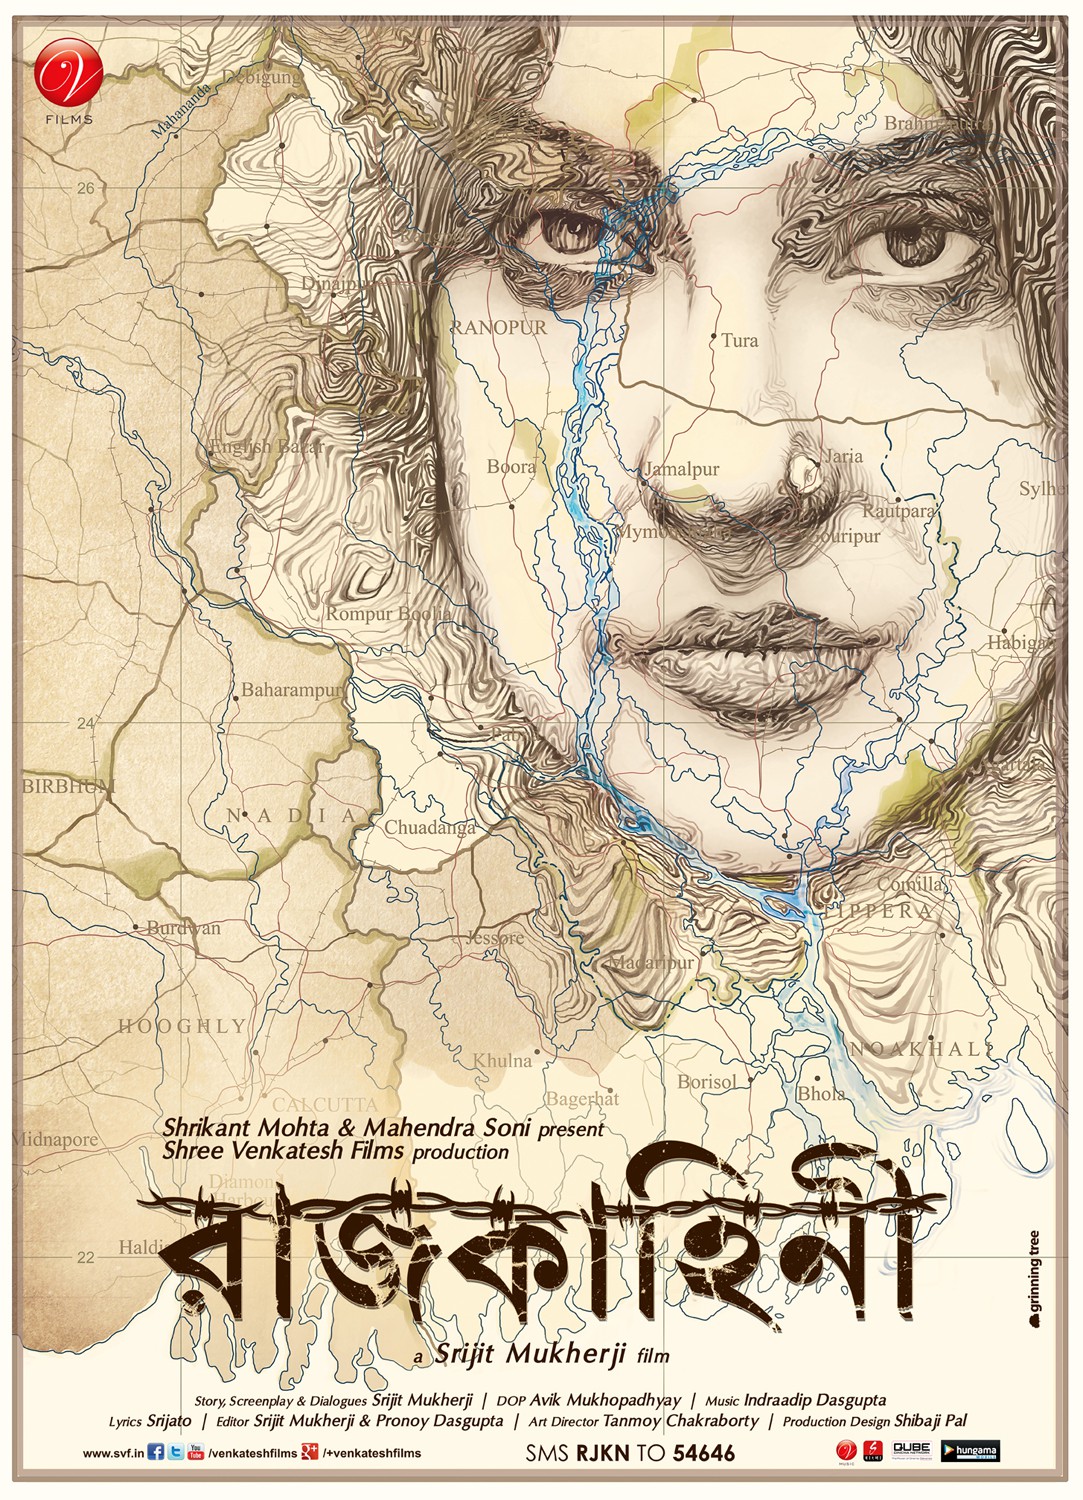 Extra Large Movie Poster Image for Rajkahini (#4 of 4)